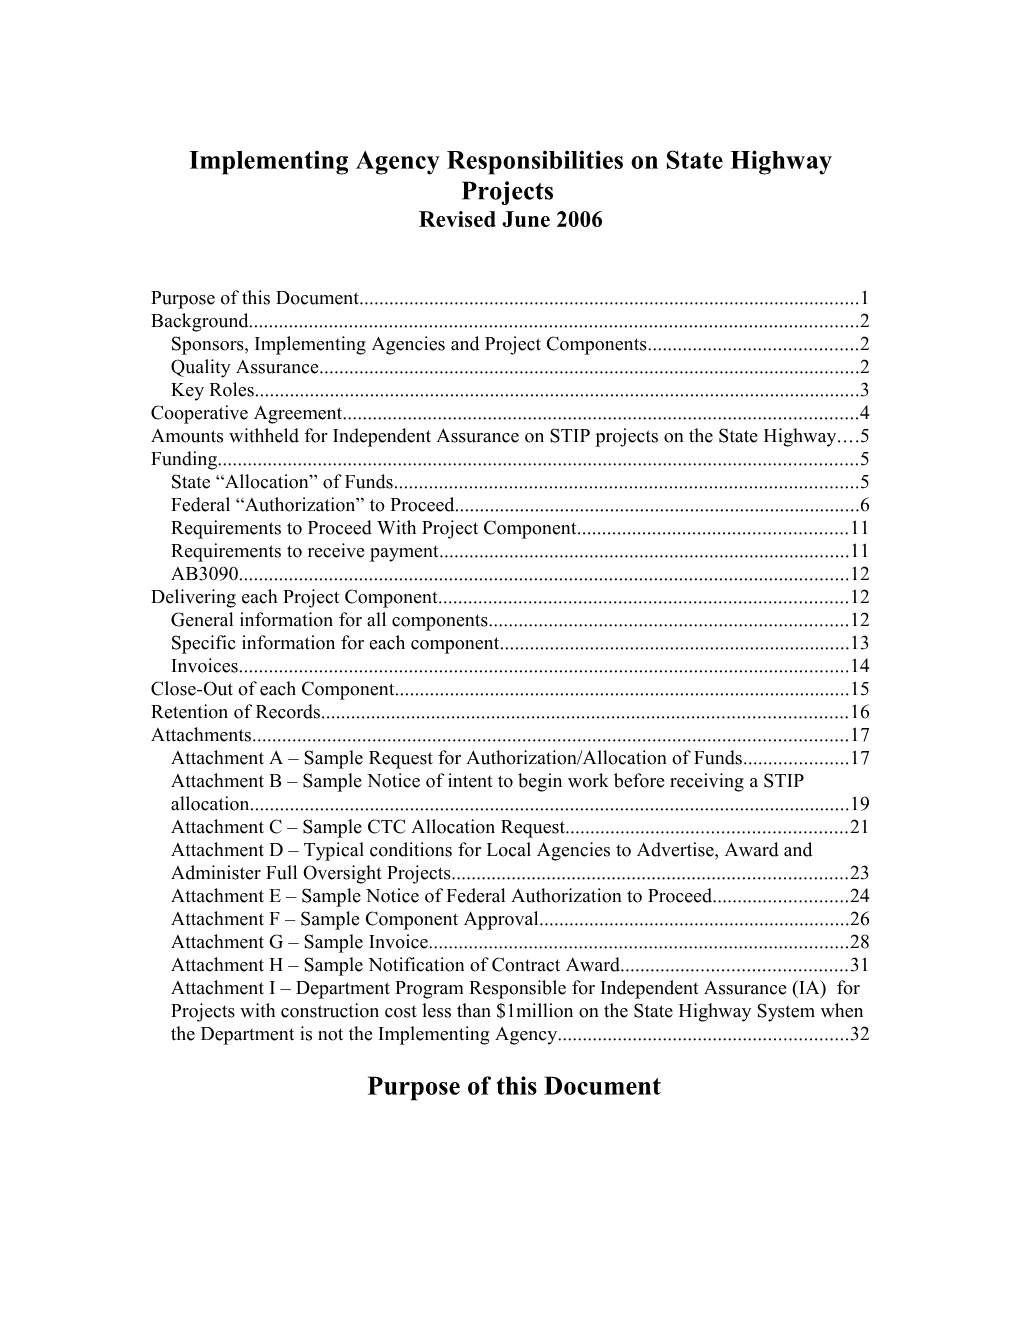 DRAFT Responsibilities of the Implementing Agency on STIP Projects on a State Highway